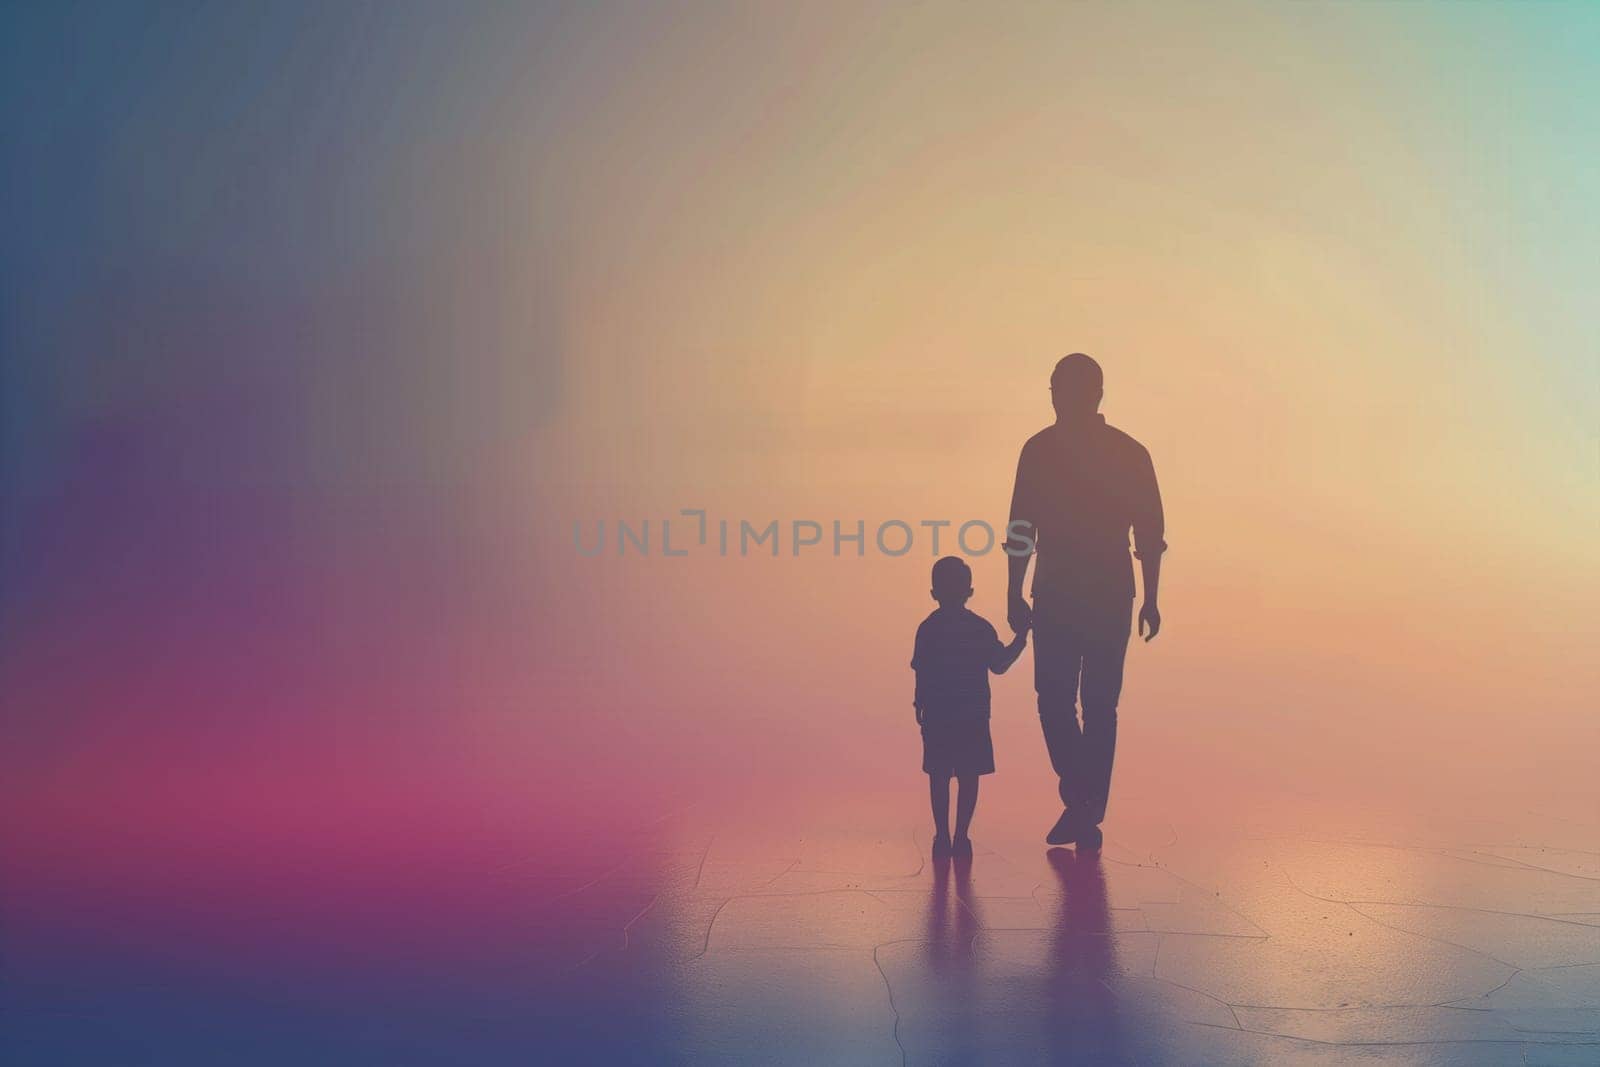 A man and a little girl are walking together in thick fog, their silhouettes barely visible as they move through the misty environment.